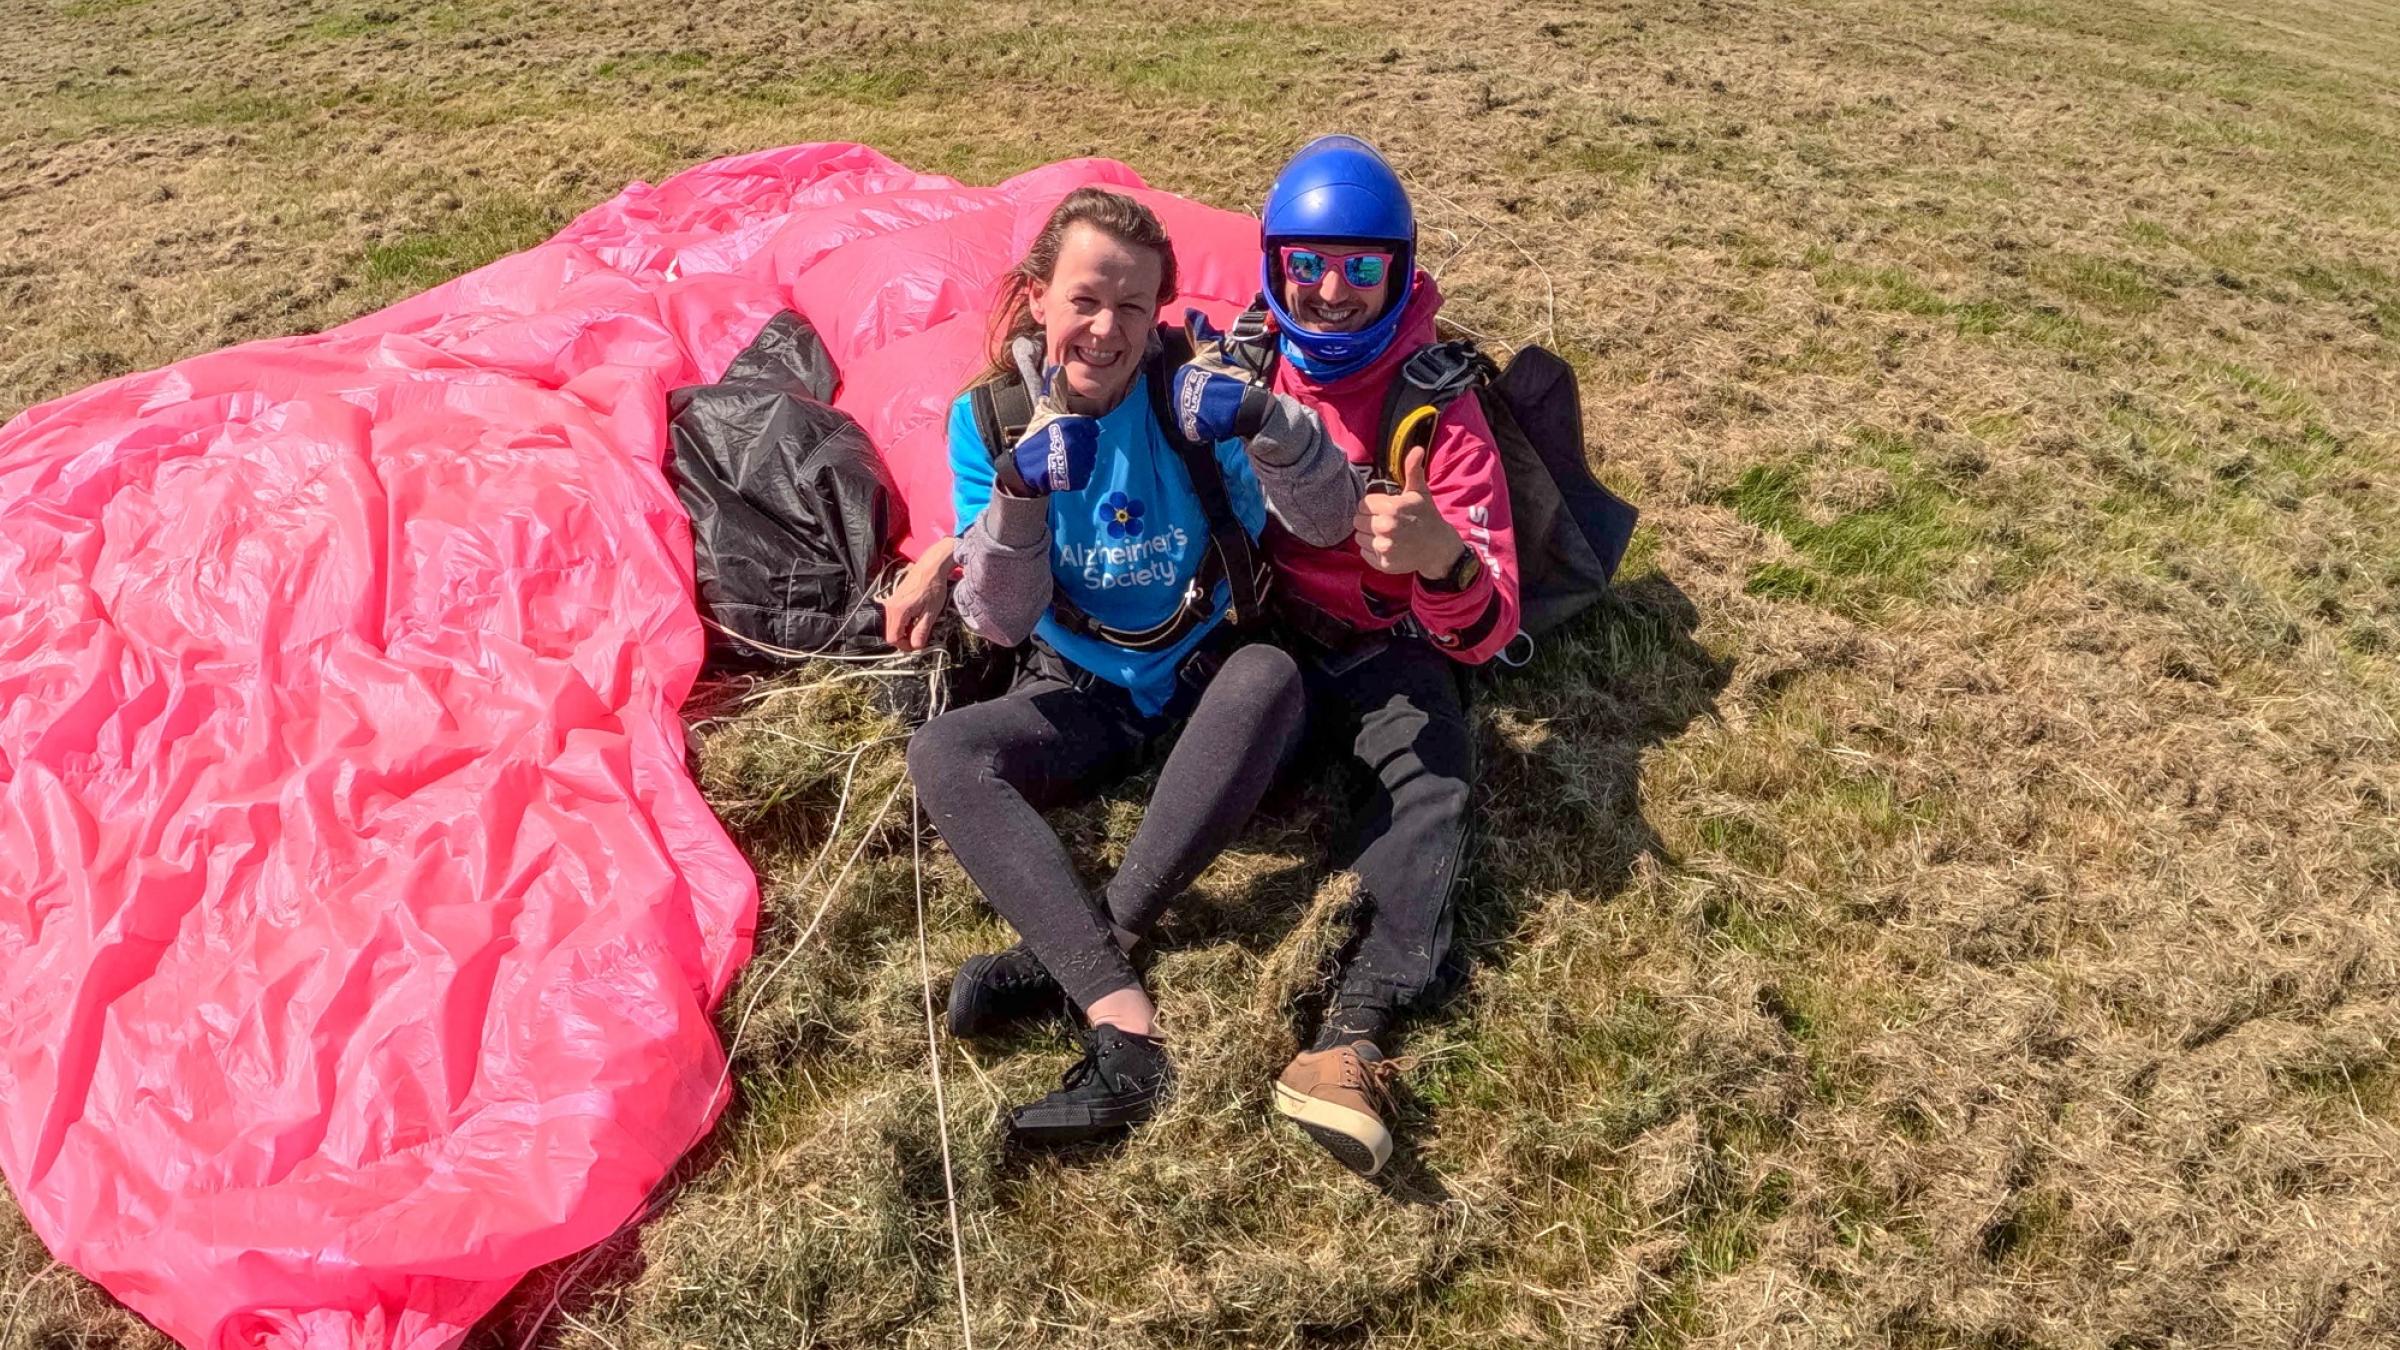 Lady and man sat on the ground by a parachute.